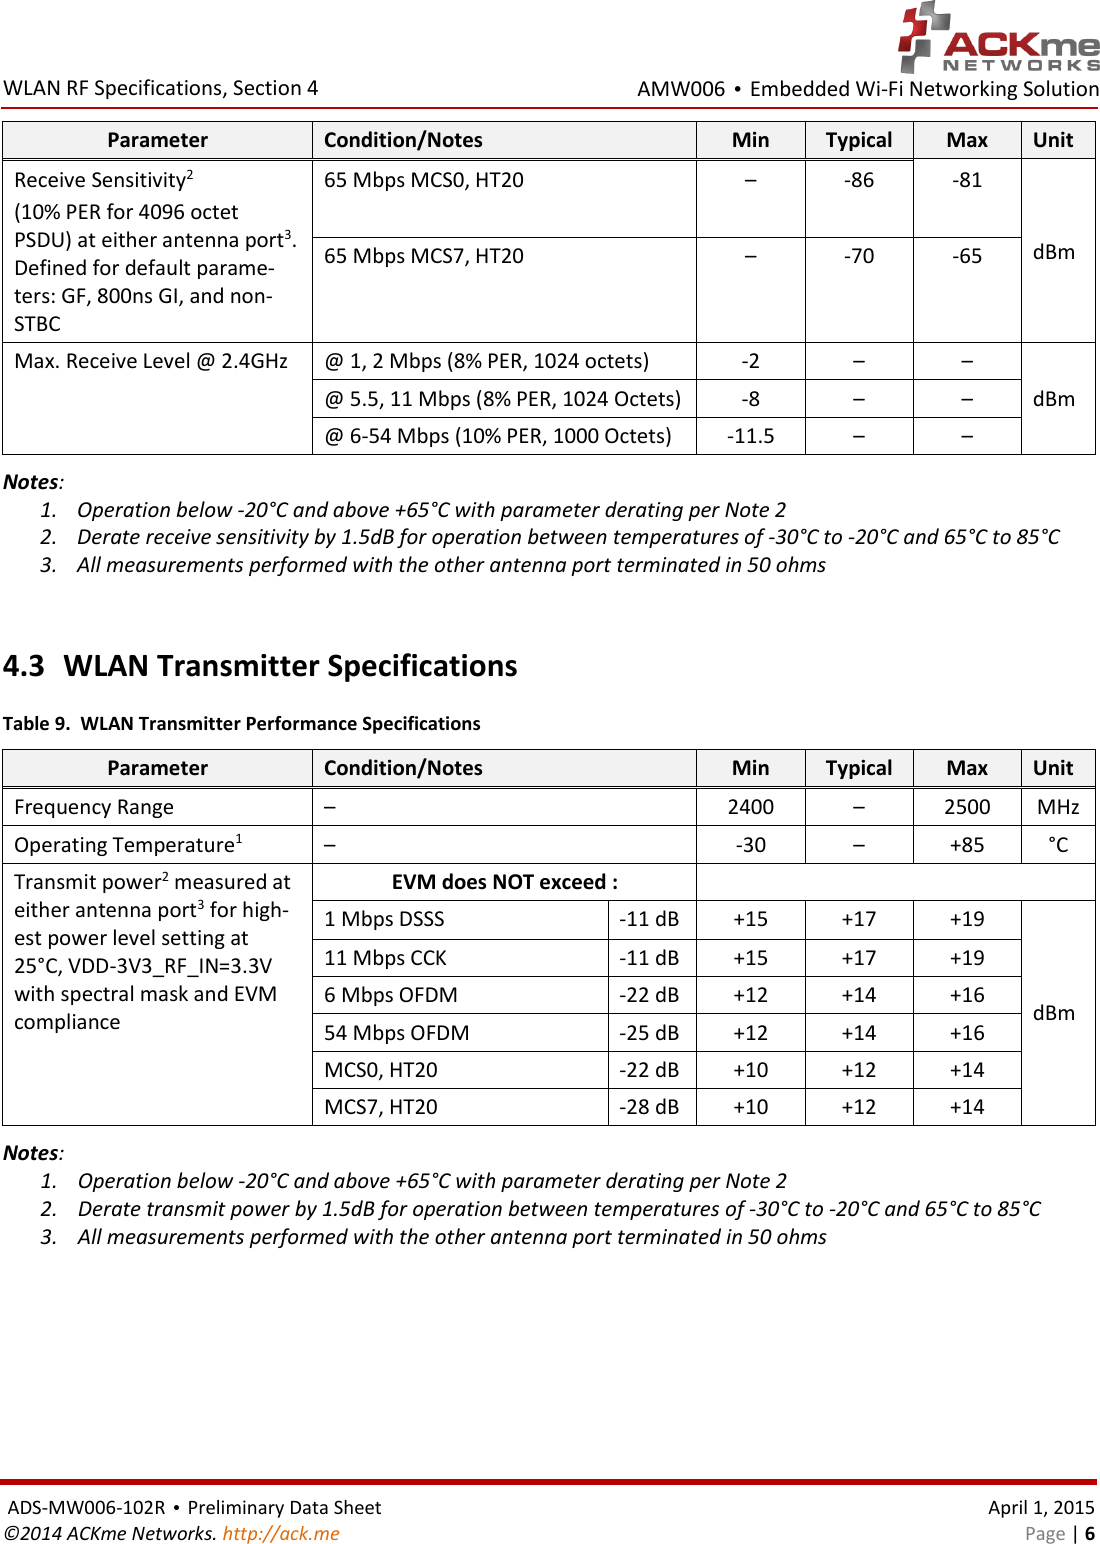 AMW006 • Embedded Wi-Fi Networking Solution  WLAN RF Specifications, Section 4  ADS-MW006-102R • Preliminary Data Sheet    April 1, 2015 ©2014 ACKme Networks. http://ack.me    Page | 6 Parameter Condition/Notes Min Typical Max Unit Receive Sensitivity2 (10% PER for 4096 octet PSDU) at either antenna port3. Defined for default parame-ters: GF, 800ns GI, and non-STBC 65 Mbps MCS0, HT20 – -86 -81 dBm 65 Mbps MCS7, HT20 – -70 -65 Max. Receive Level @ 2.4GHz @ 1, 2 Mbps (8% PER, 1024 octets) -2 – – dBm @ 5.5, 11 Mbps (8% PER, 1024 Octets) -8 – – @ 6-54 Mbps (10% PER, 1000 Octets) -11.5 – – Notes: 1. Operation below -20°C and above +65°C with parameter derating per Note 2 2. Derate receive sensitivity by 1.5dB for operation between temperatures of -30°C to -20°C and 65°C to 85°C 3. All measurements performed with the other antenna port terminated in 50 ohms  4.3 WLAN Transmitter Specifications Table 9.  WLAN Transmitter Performance Specifications Parameter Condition/Notes Min Typical Max Unit Frequency Range –  2400 – 2500 MHz Operating Temperature1 – -30 – +85 °C Transmit power2 measured at either antenna port3 for high-est power level setting at 25°C, VDD-3V3_RF_IN=3.3V with spectral mask and EVM compliance EVM does NOT exceed :  1 Mbps DSSS -11 dB +15 +17 +19 dBm 11 Mbps CCK -11 dB +15 +17 +19 6 Mbps OFDM -22 dB +12 +14 +16 54 Mbps OFDM -25 dB +12 +14 +16 MCS0, HT20 -22 dB +10 +12 +14 MCS7, HT20 -28 dB +10 +12 +14 Notes: 1. Operation below -20°C and above +65°C with parameter derating per Note 2 2. Derate transmit power by 1.5dB for operation between temperatures of -30°C to -20°C and 65°C to 85°C 3. All measurements performed with the other antenna port terminated in 50 ohms  